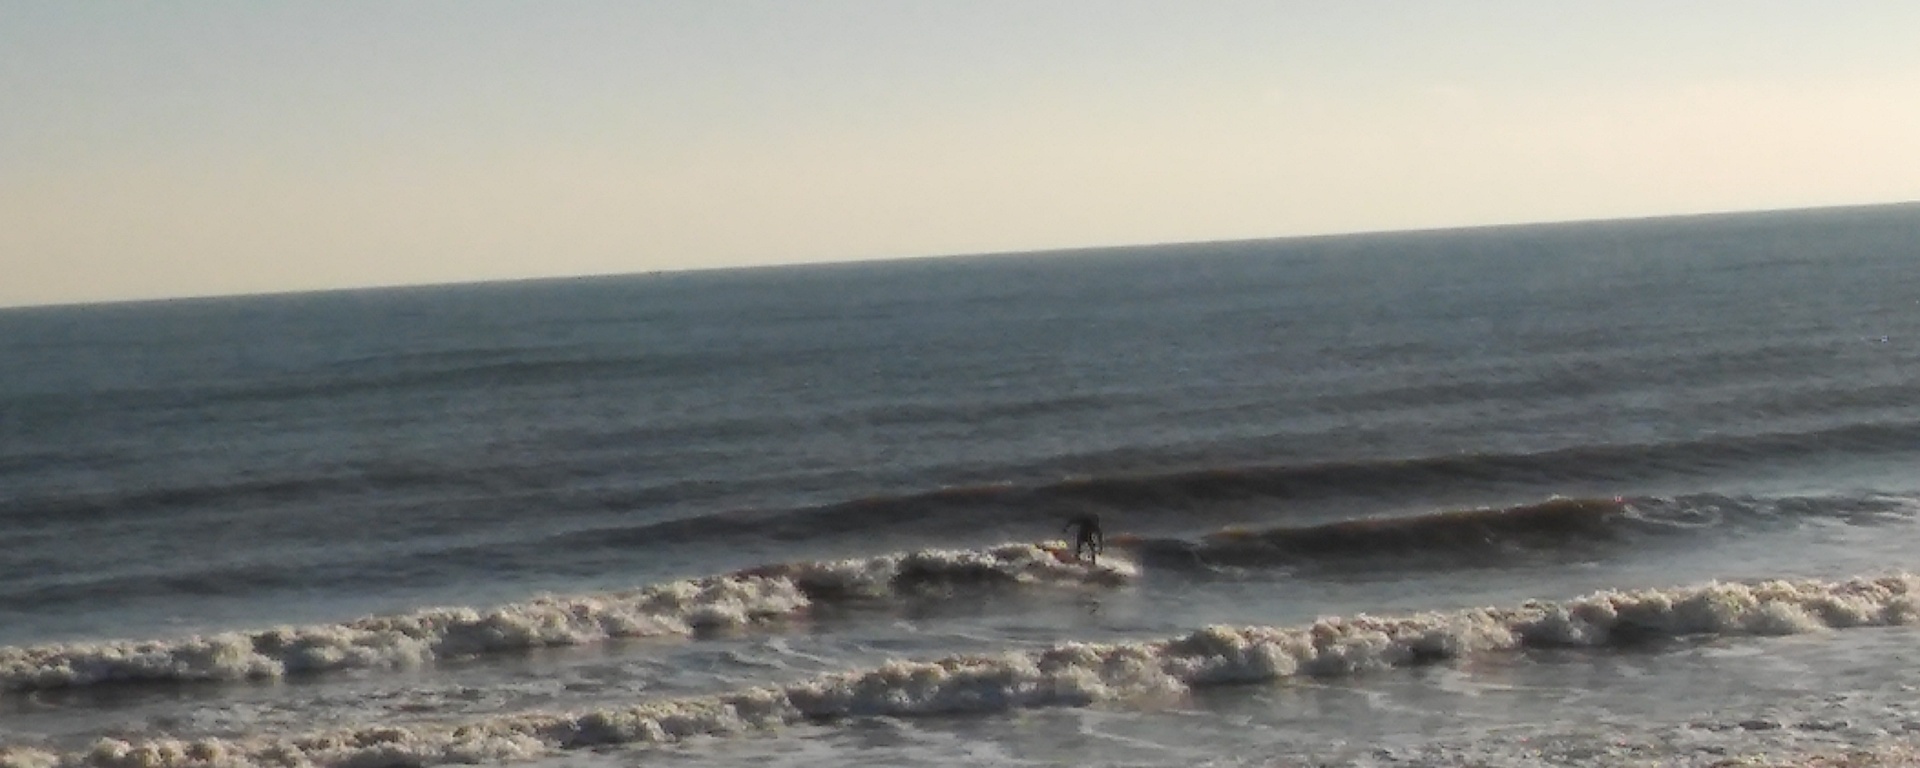 ex10-sidmouth-29th-november-surfing